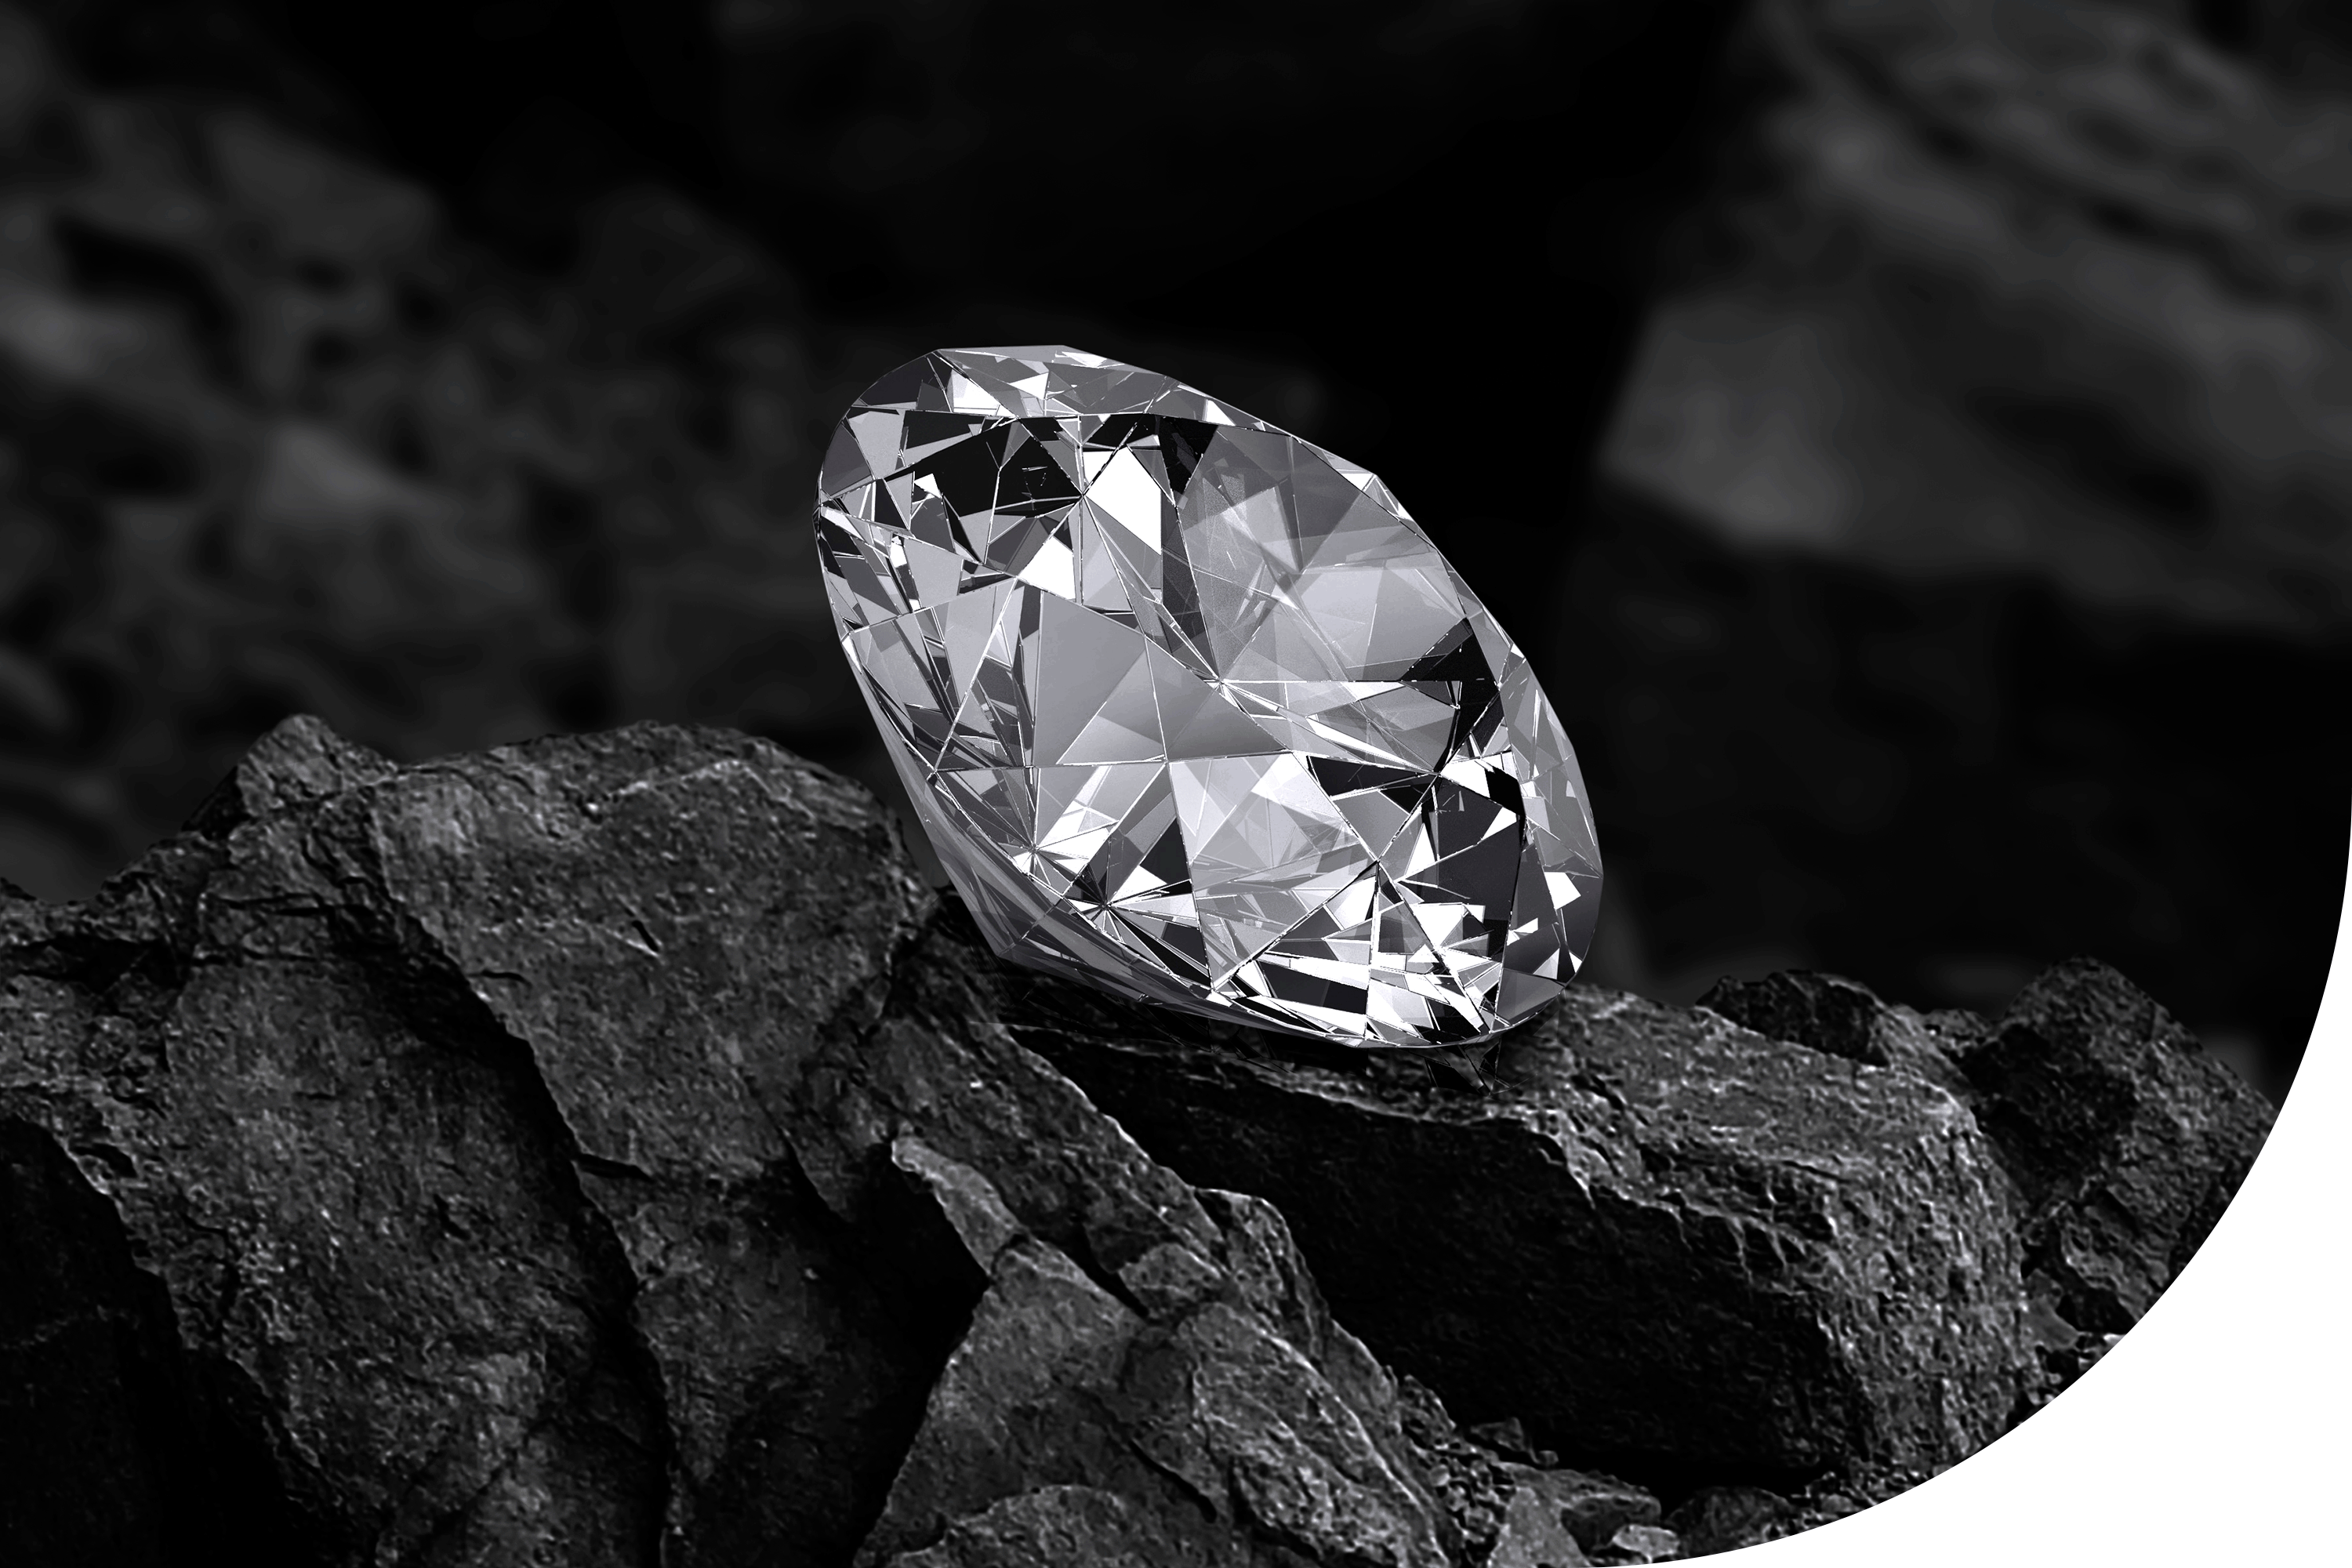 A sparkling diamond resting on a rugged, dark rock, presented in black and white, highlighting its intricate facets and brilliant shine.